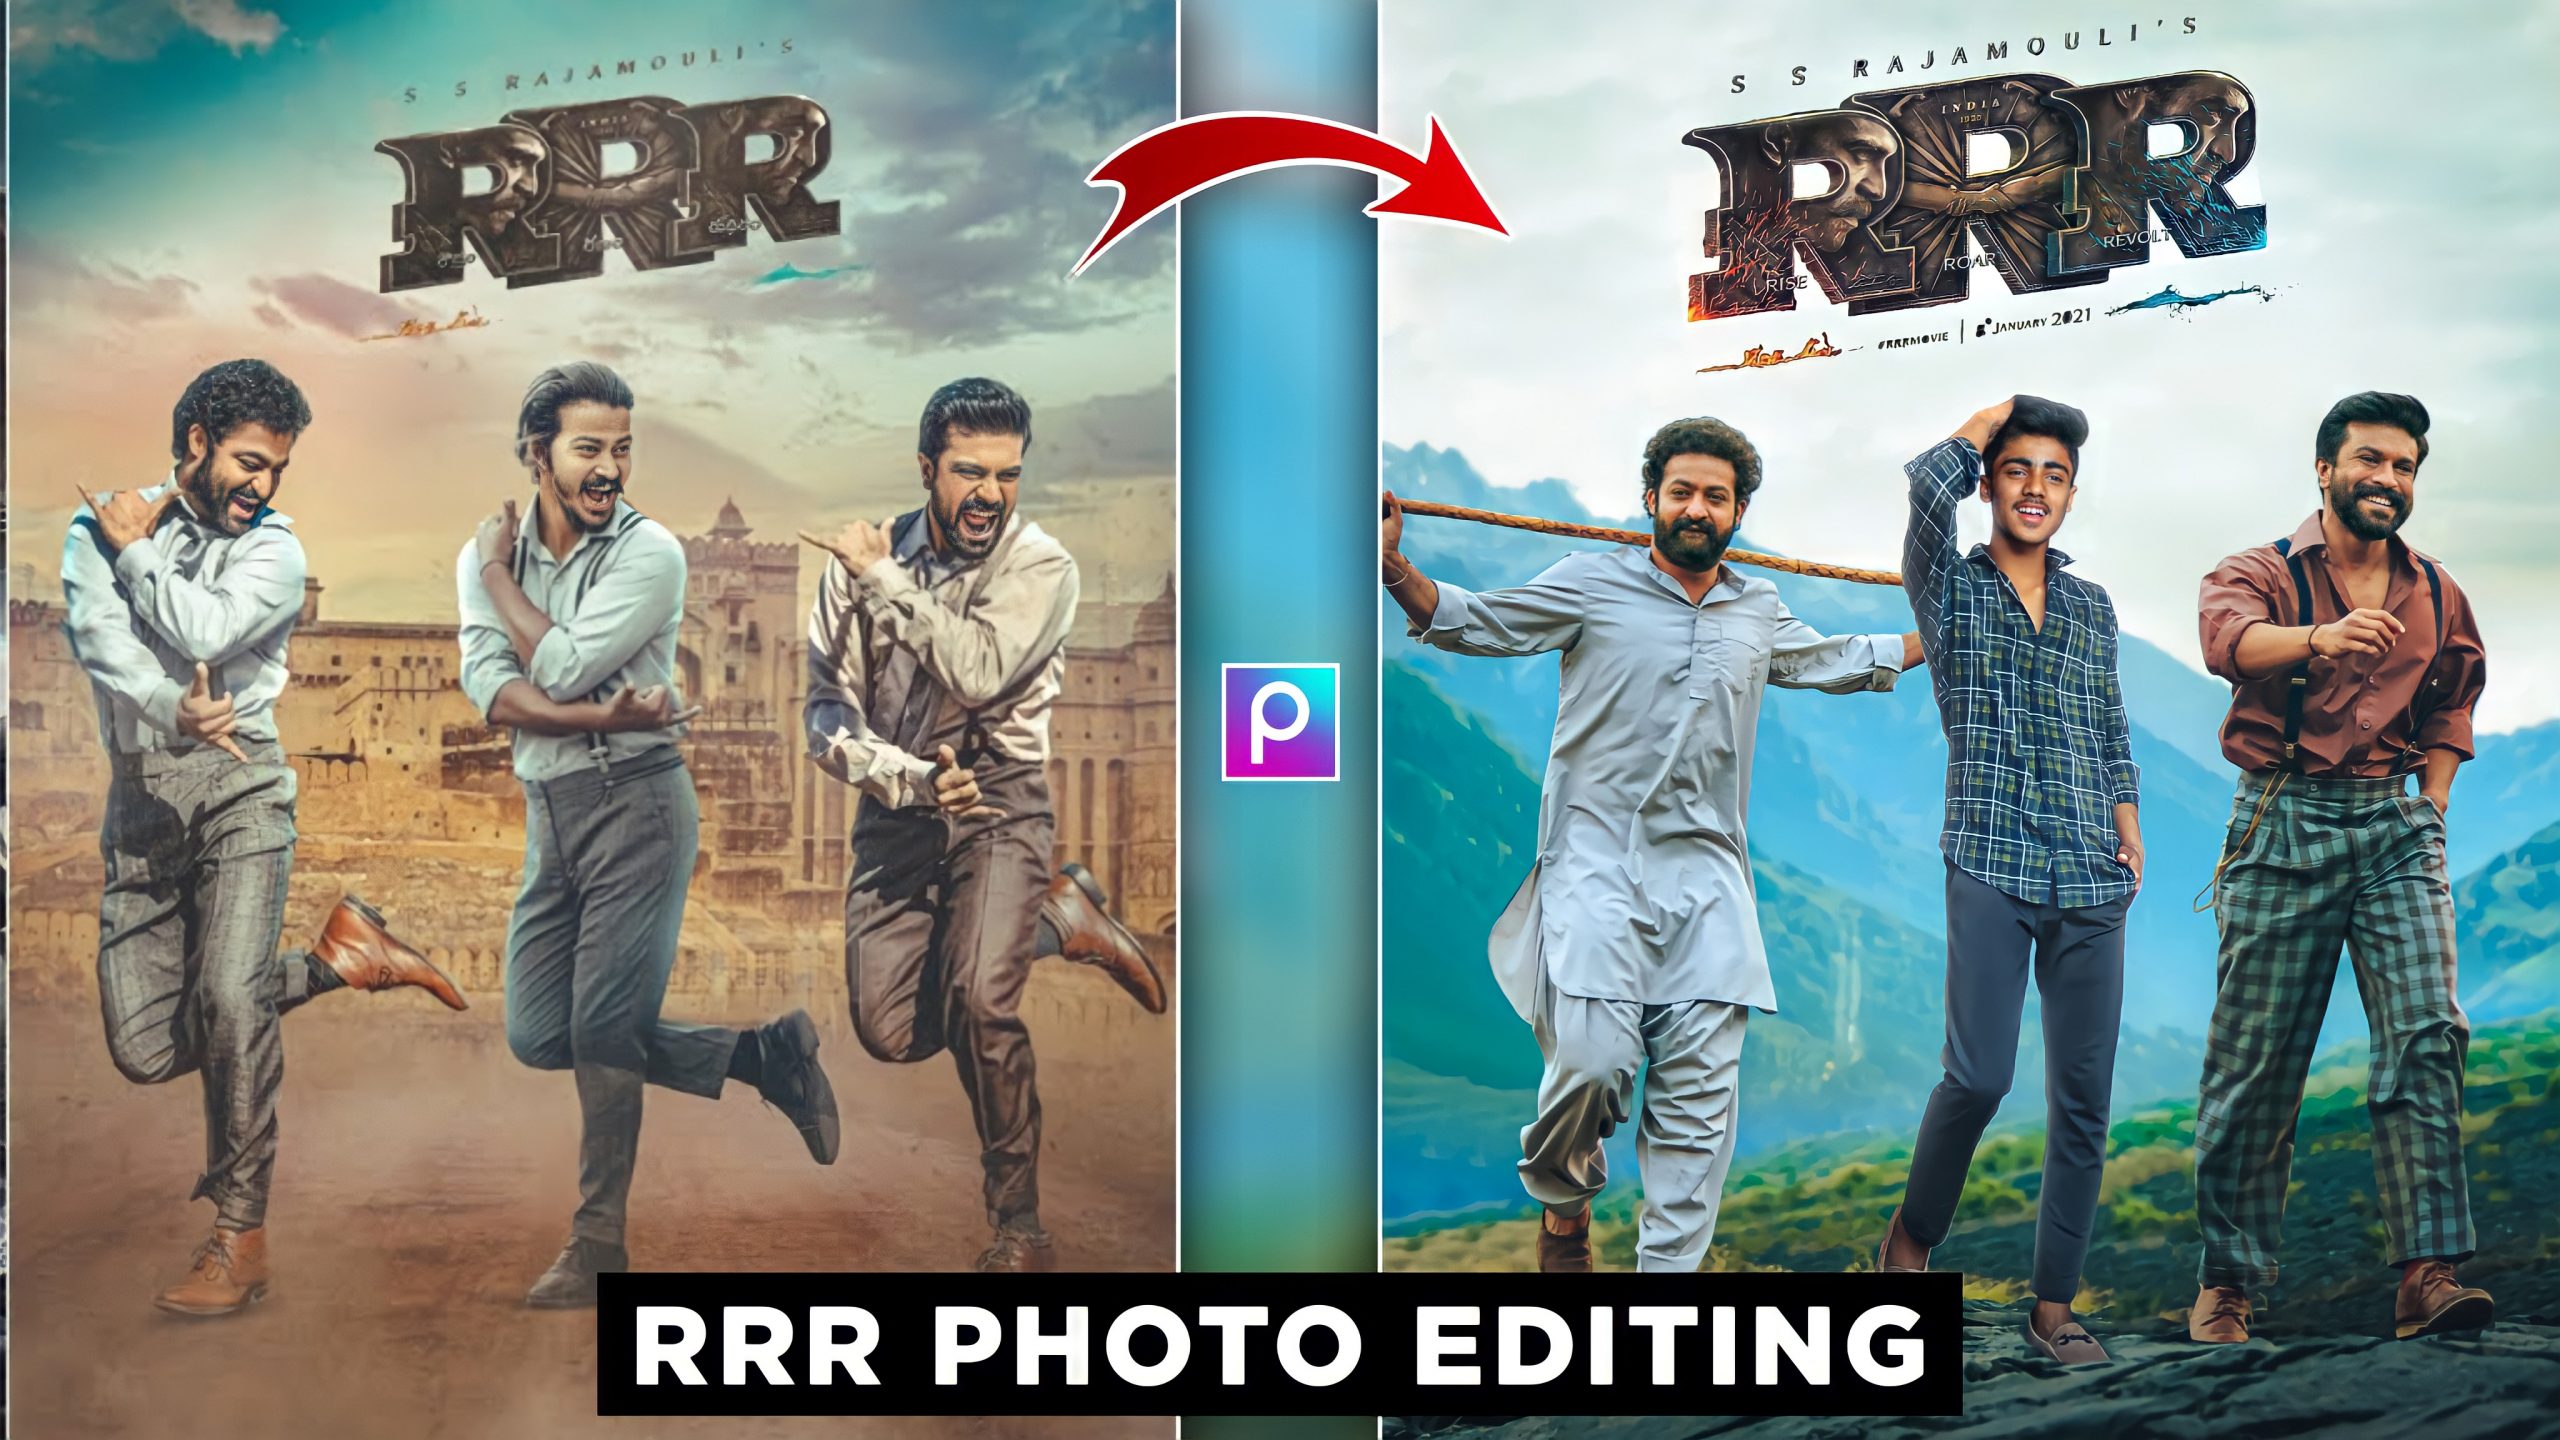 RRR Movie Poster Editing Download Background And PNG Archives - Tahir Editz